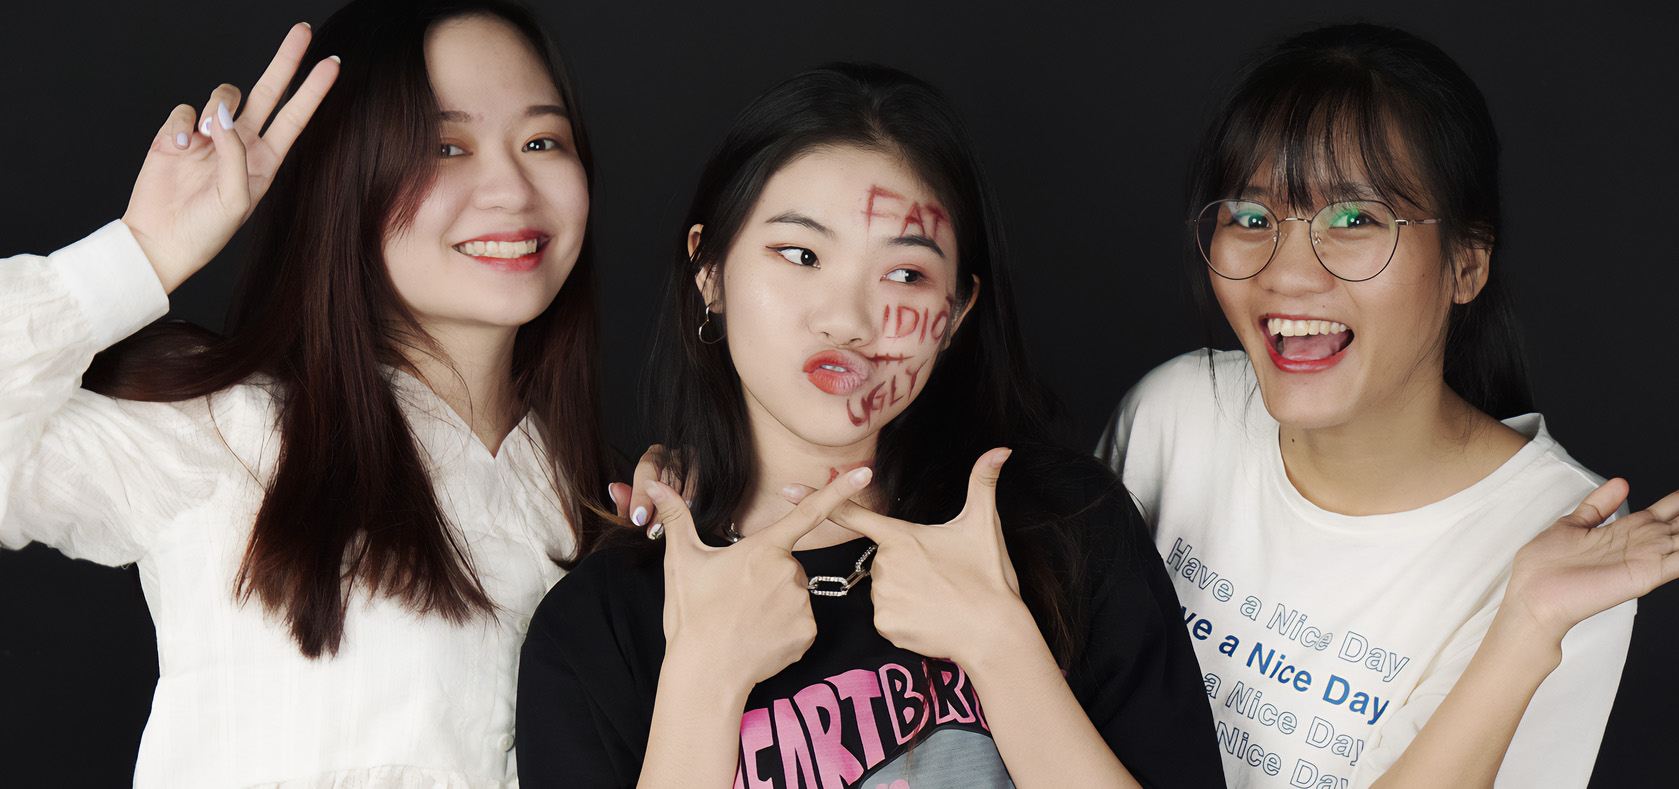 Nha (middle) and her friends developed a social media project to combat online sexual violence and cyberbullying. Photo: Ly Tu Nha